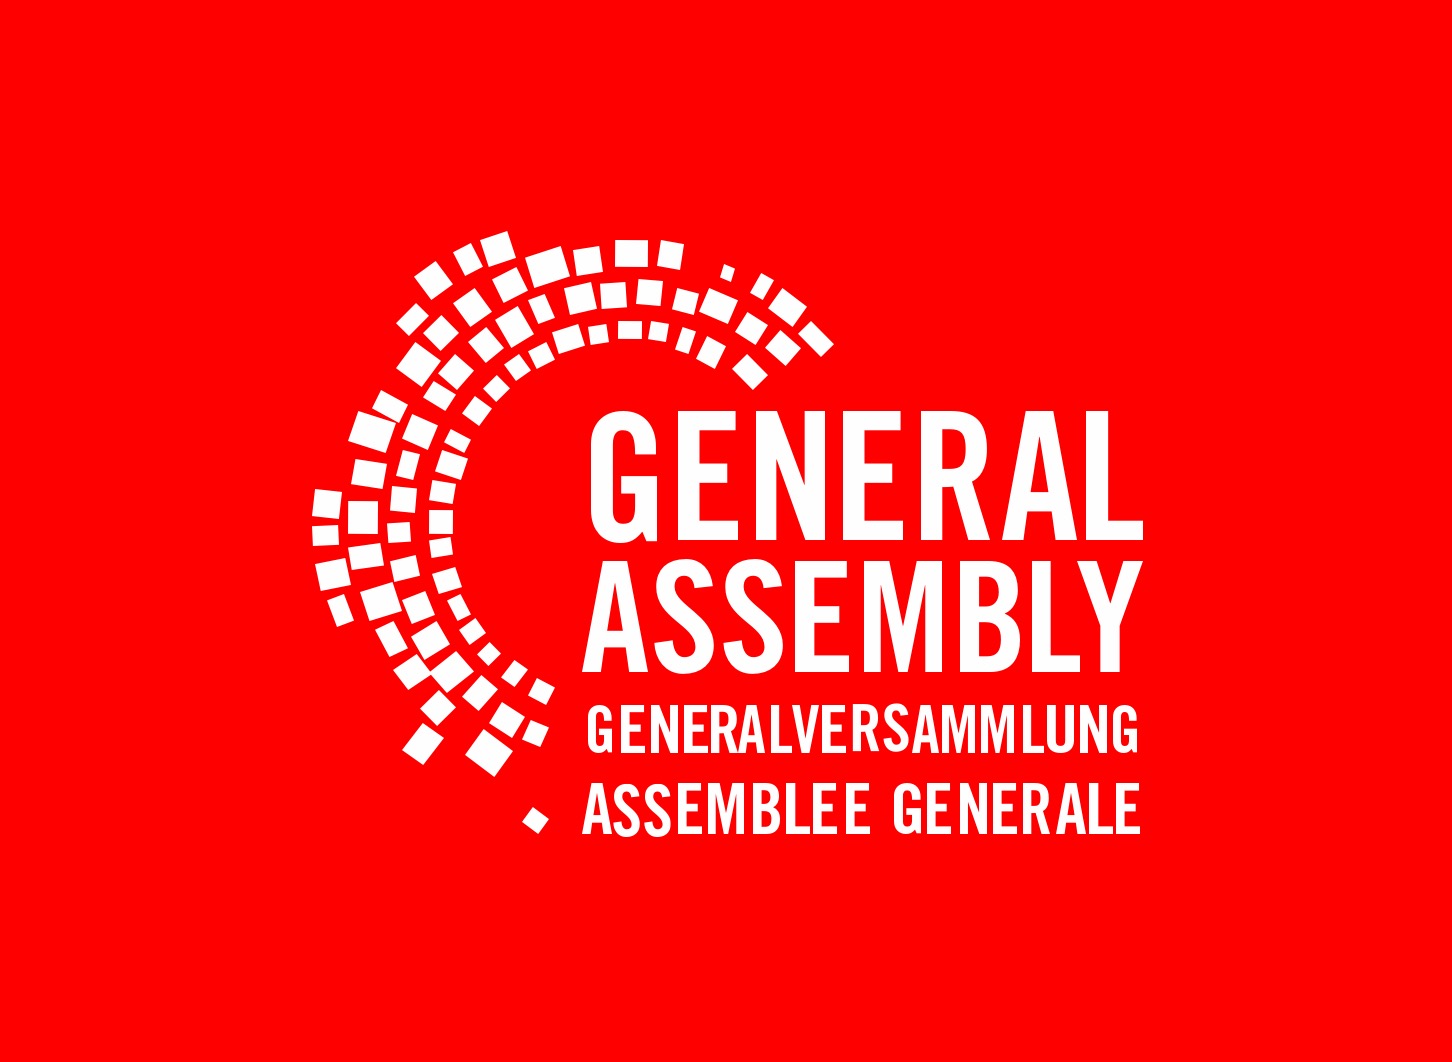 (c) General-assembly.net